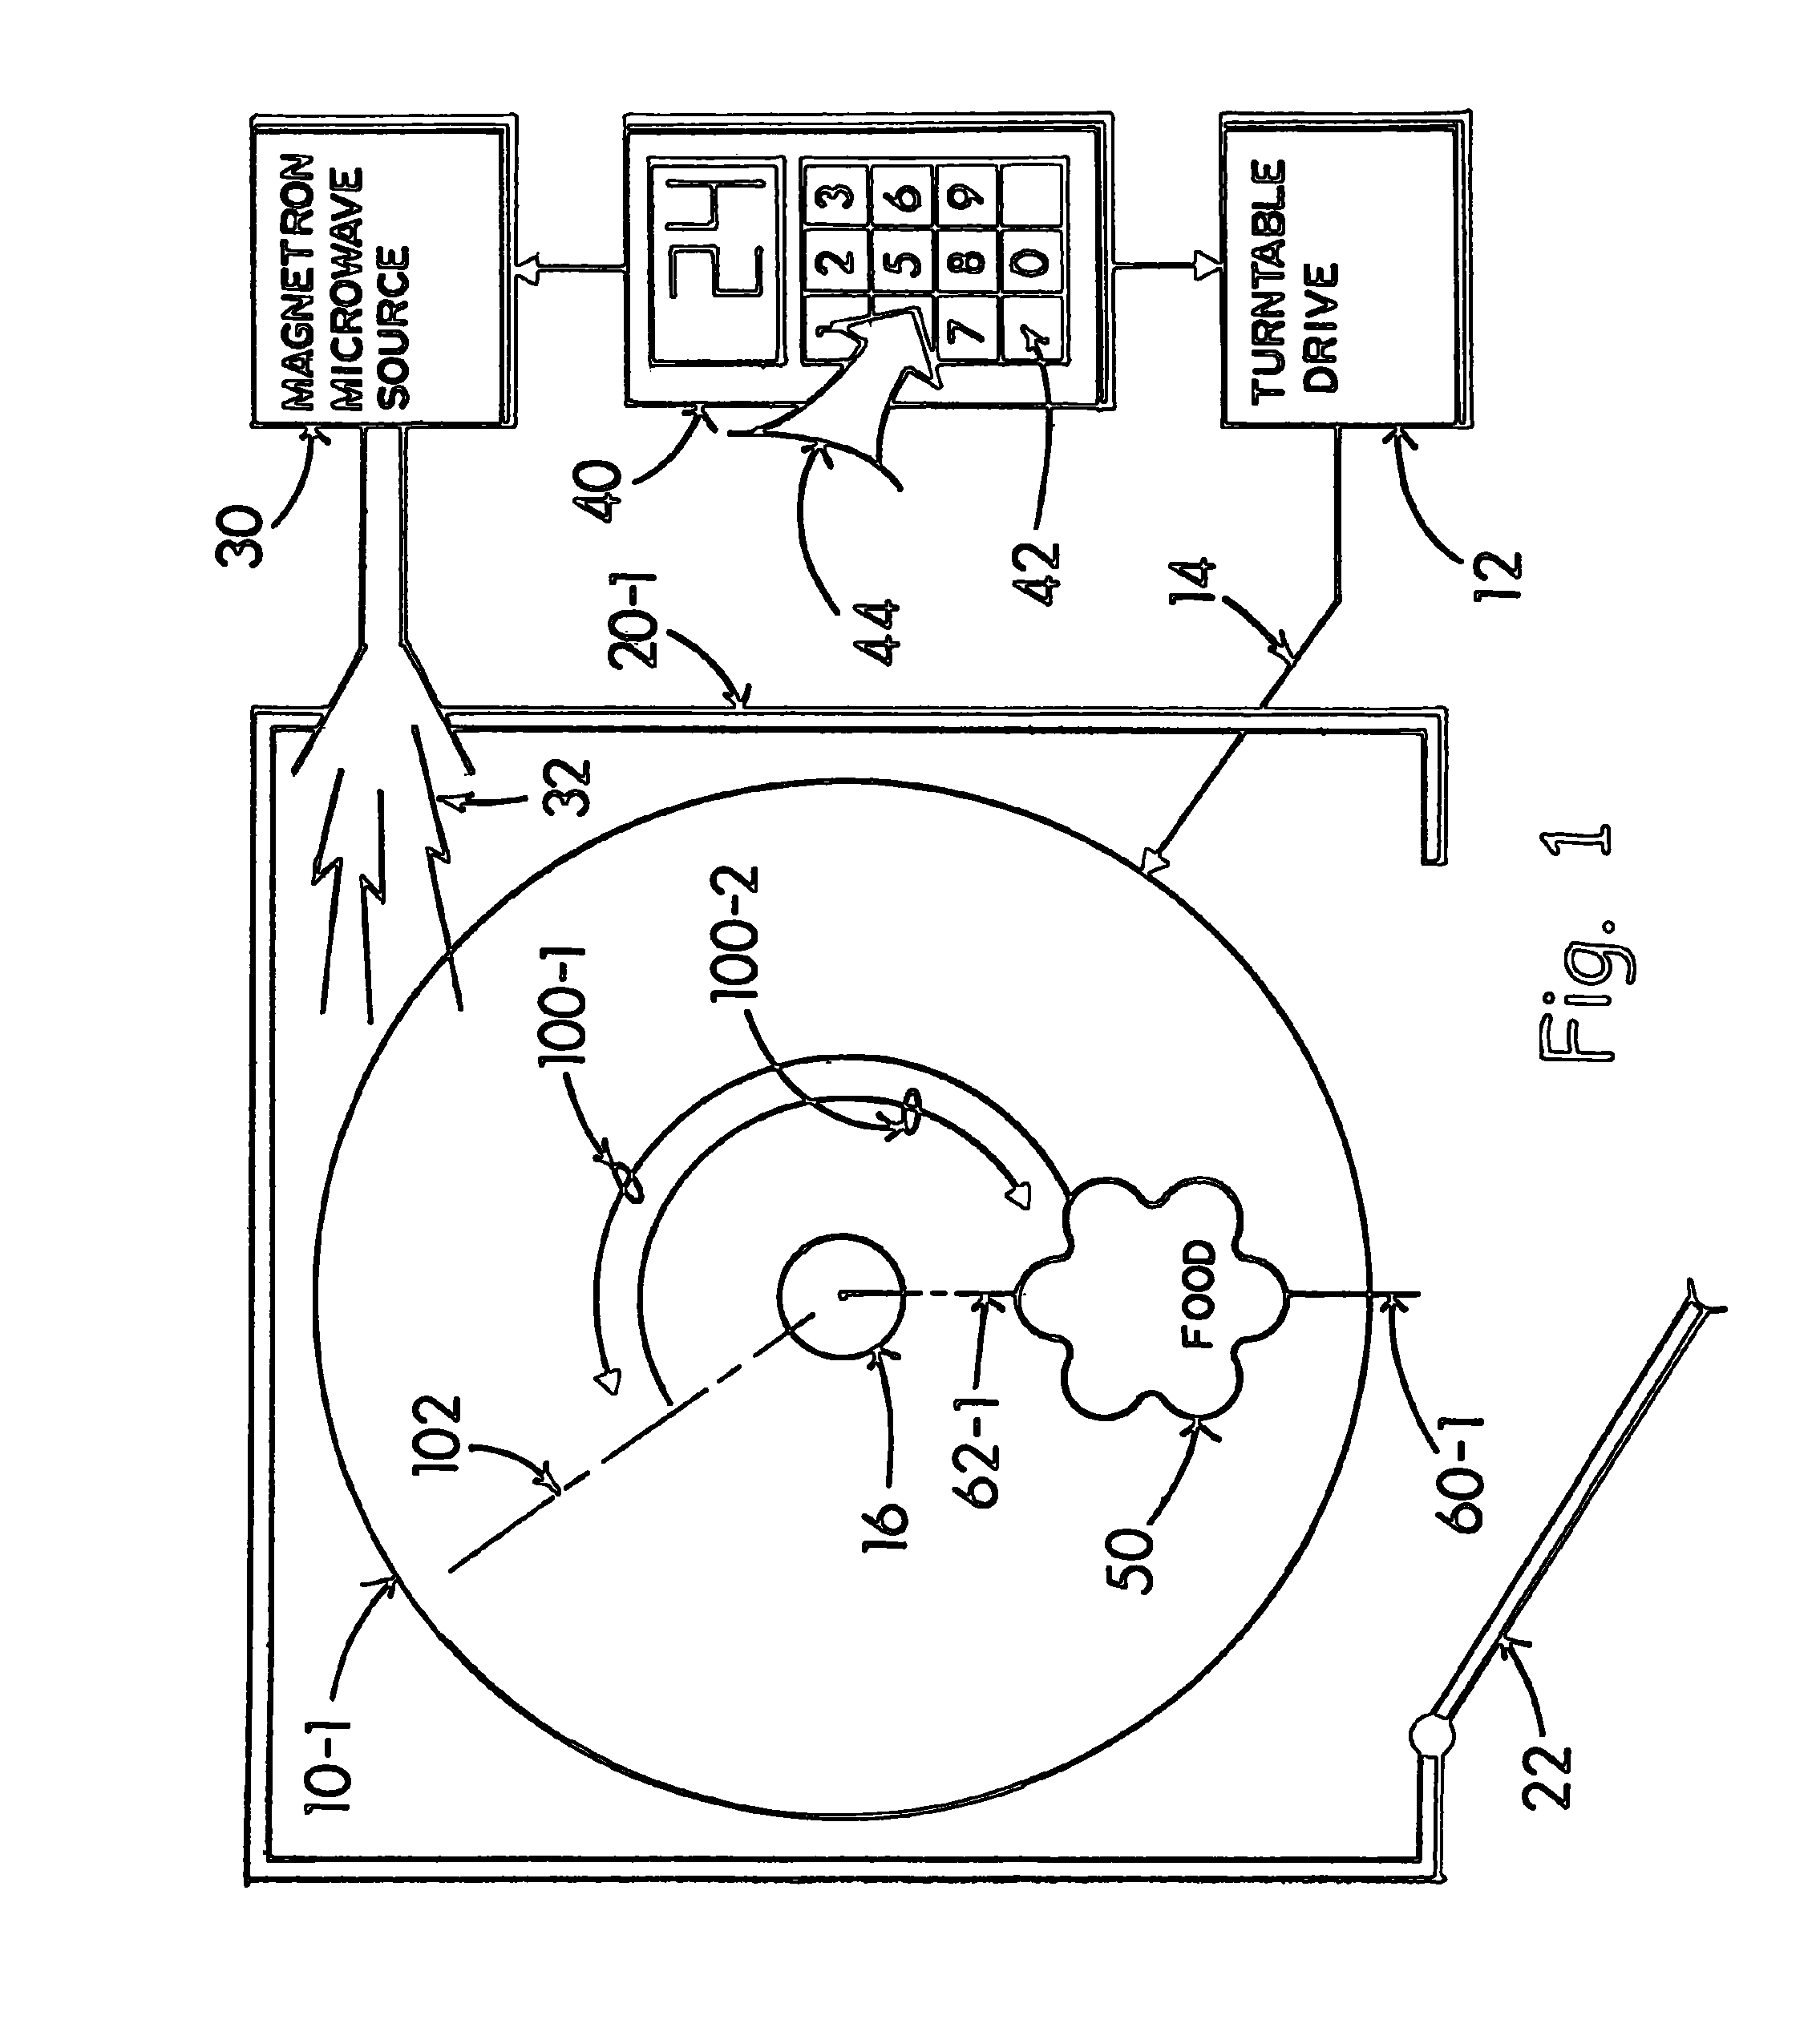 Controlled end-of-cook cycle and turntable return parking coincidence in a microwave oven